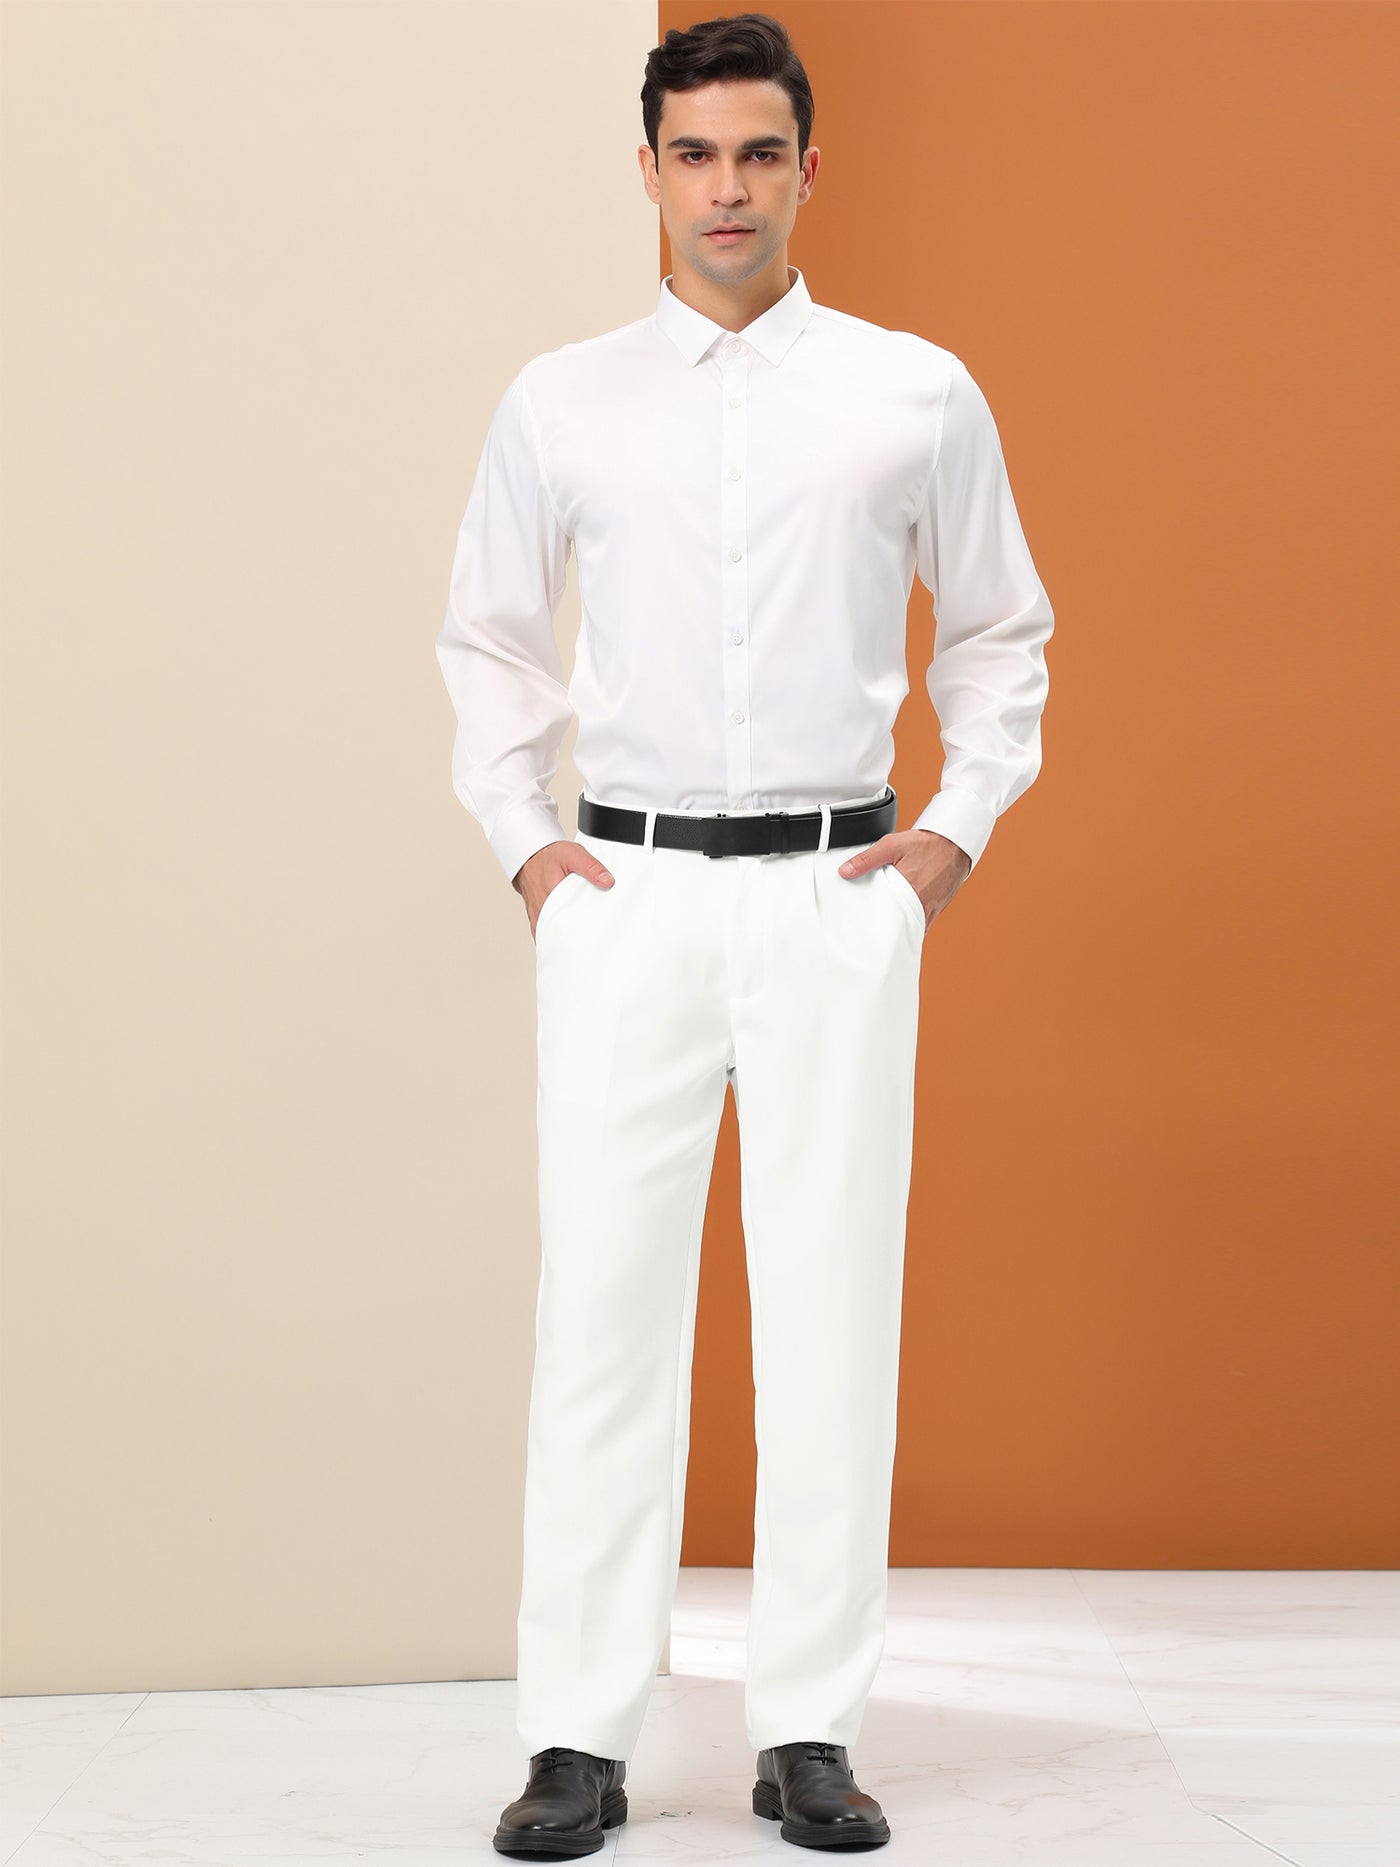 Bublédon Men's Dress Pants Solid Color Straight Fit Pleated Formal Business Trousers